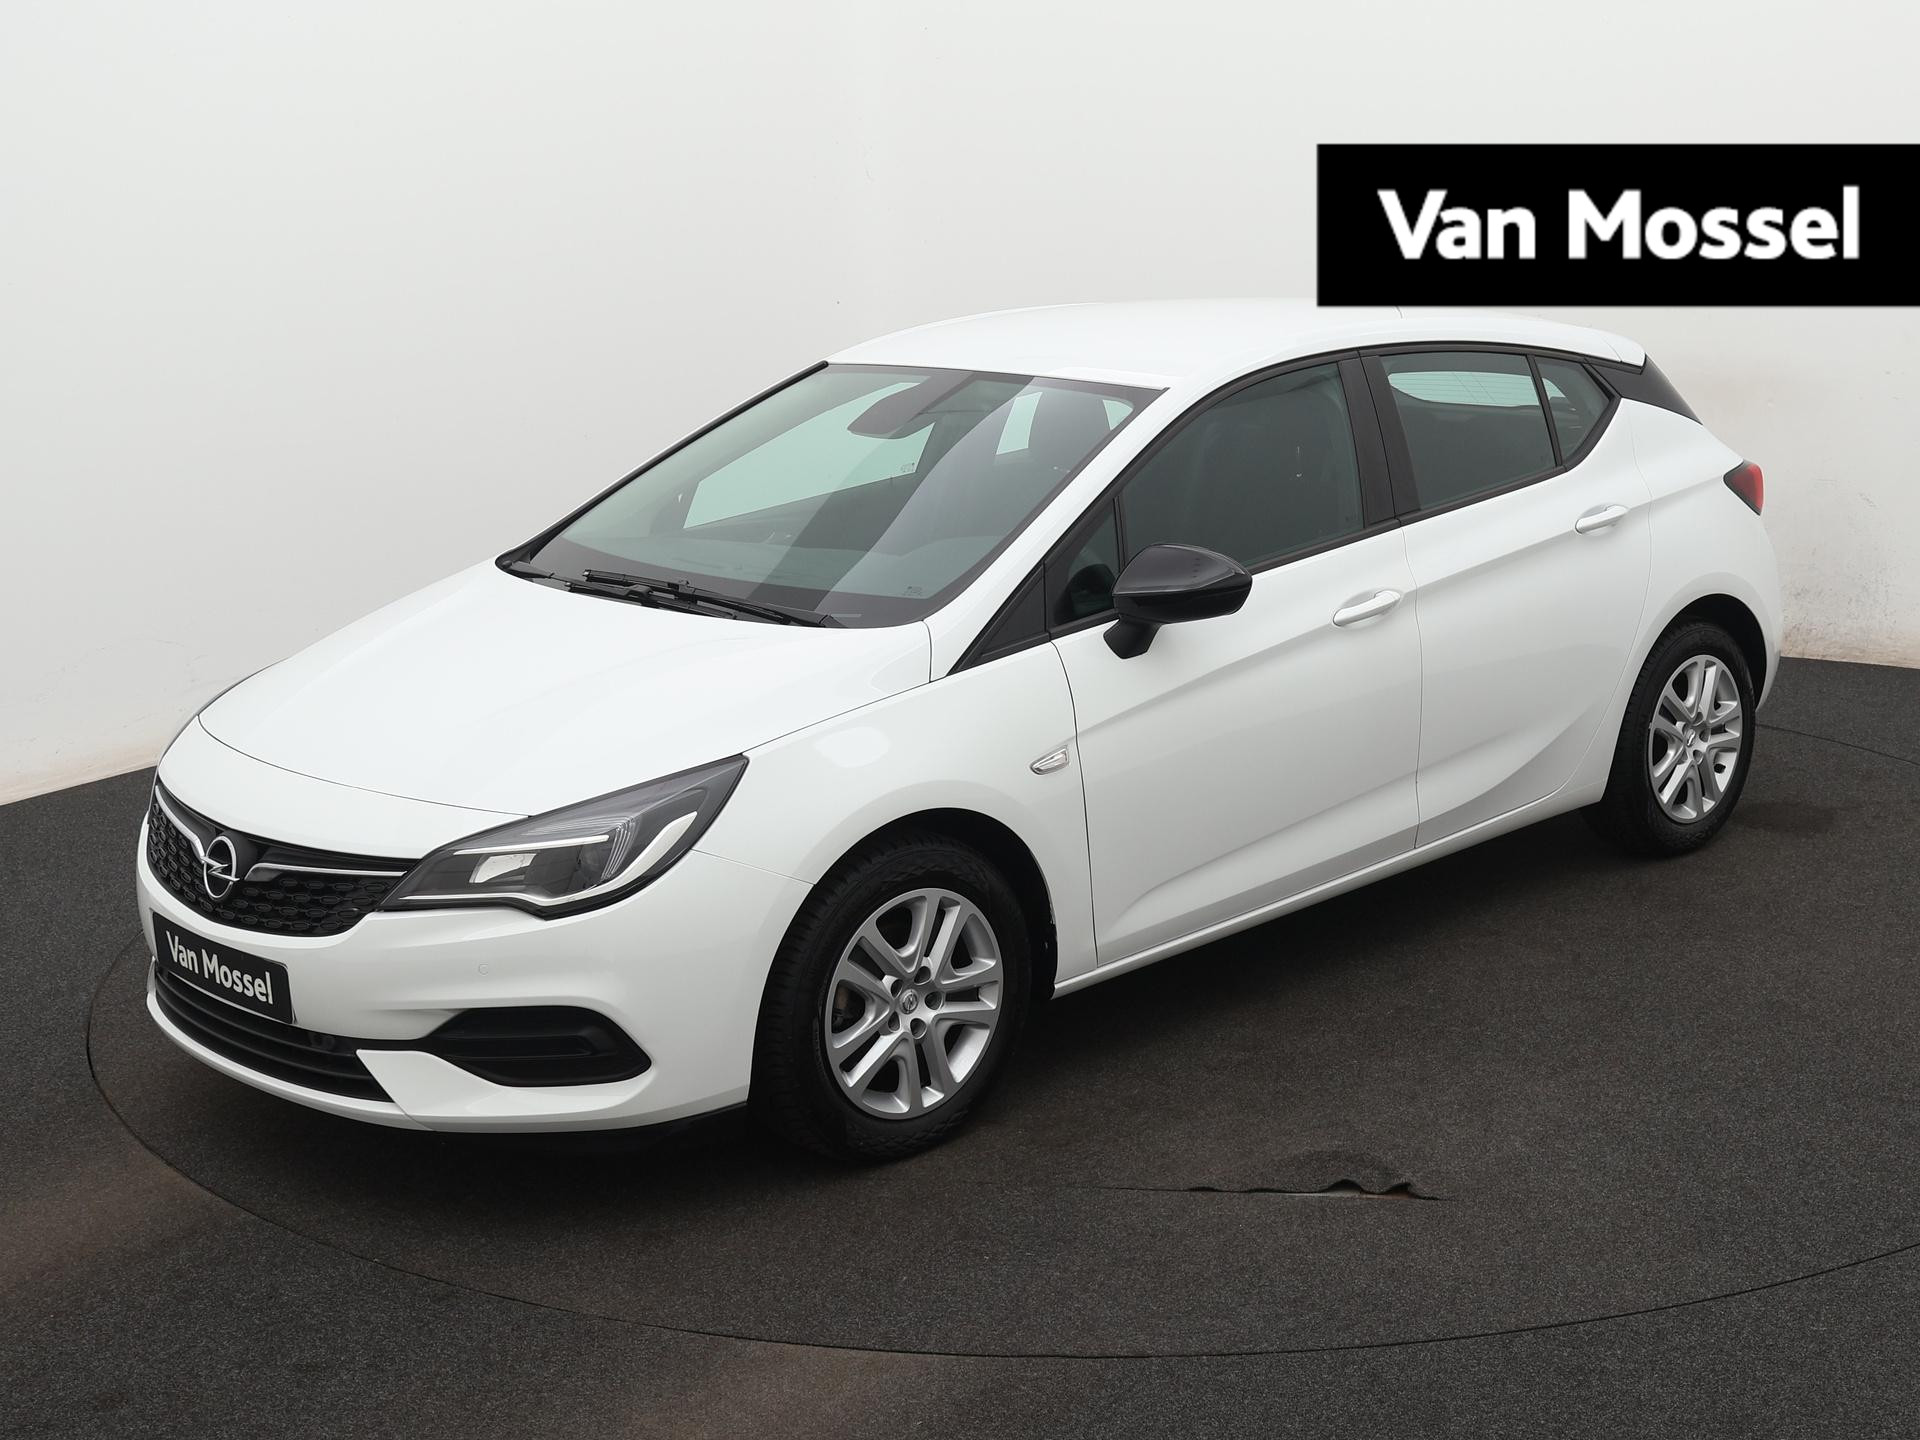 Opel Astra 1.2 Edition | Navigatie | Apple Carplay / Android Auto | DAB | Airco | Cruise Control | Slechts 19.216 km !! | |Parkeersensoren voor + achter |